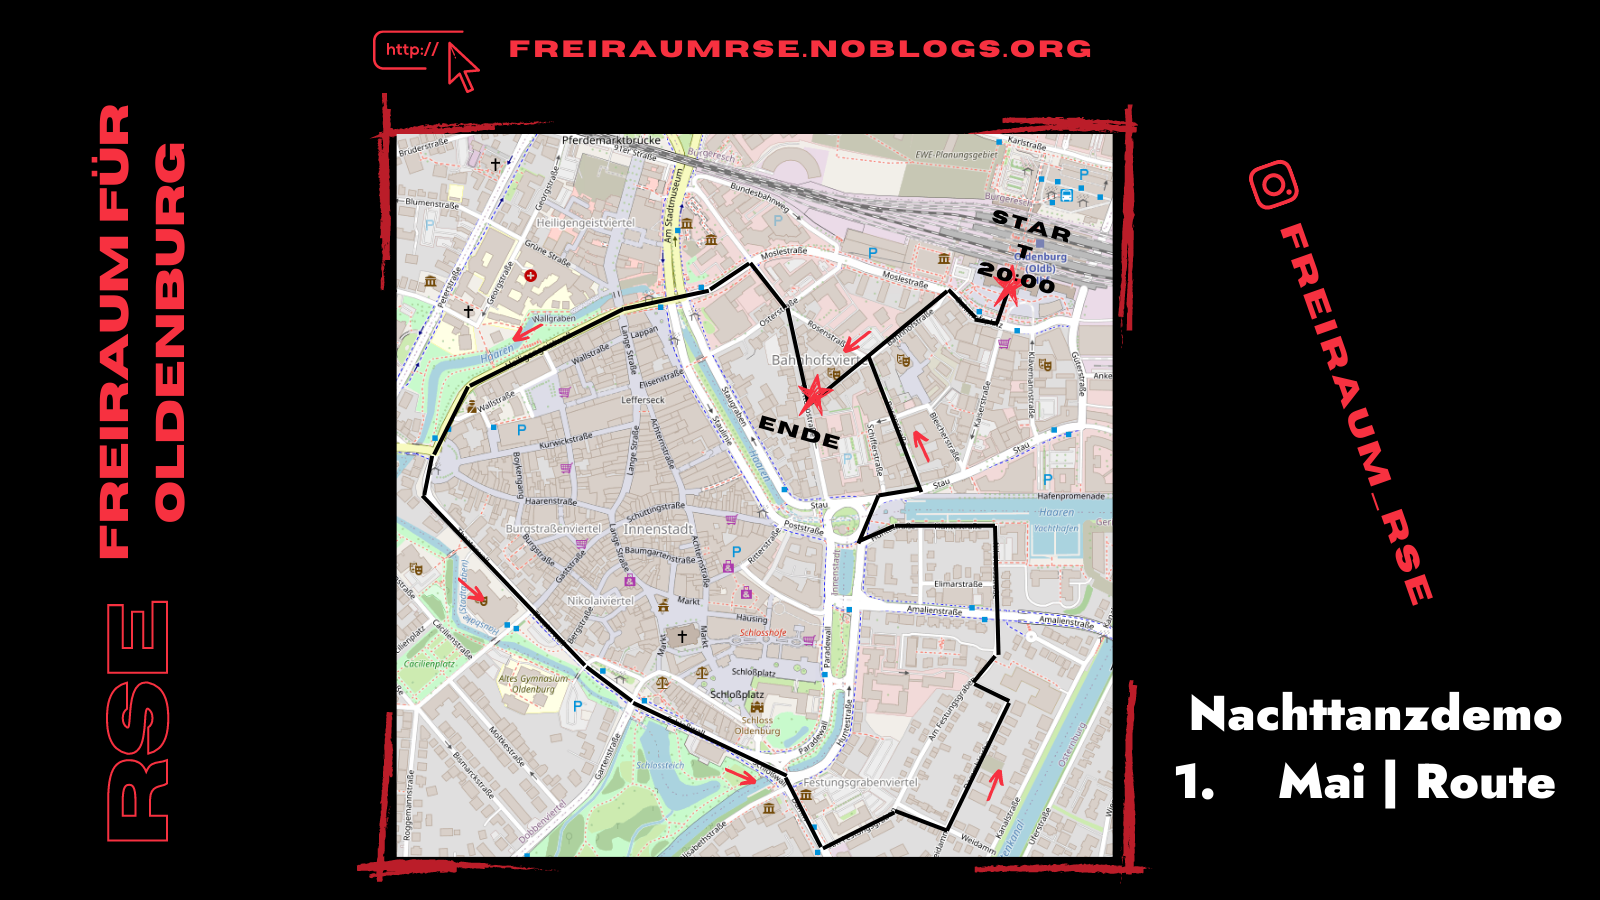 1. Mai Route, Mobivideo and Flyer